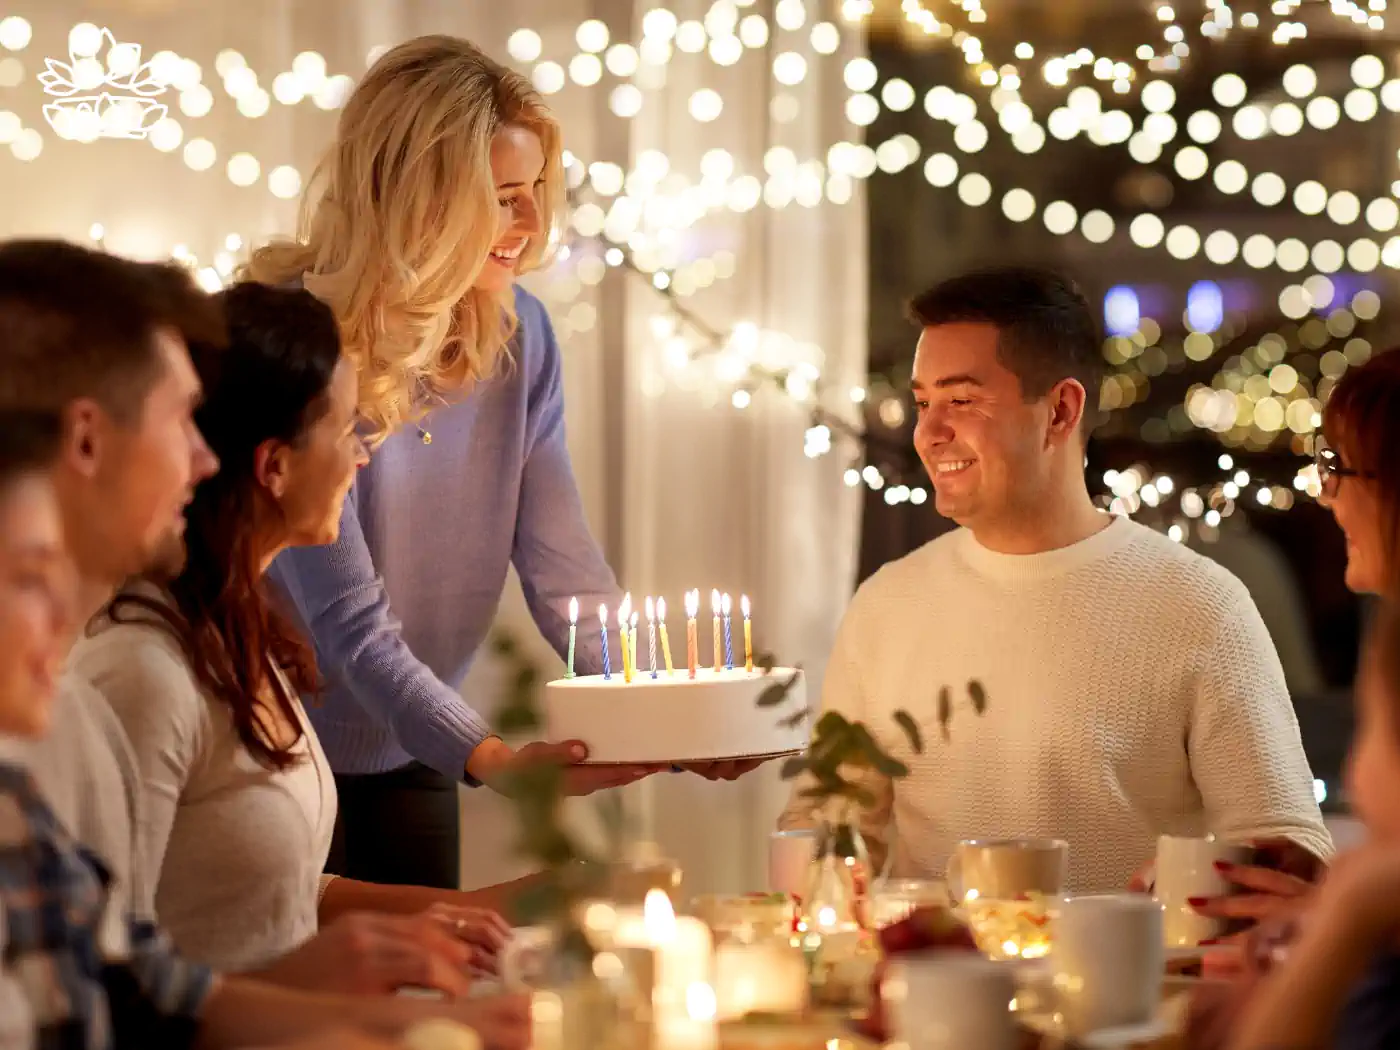 A woman presenting a birthday cake to a smiling man surrounded by friends in a warmly lit room. Fabulous Flowers and Gifts.